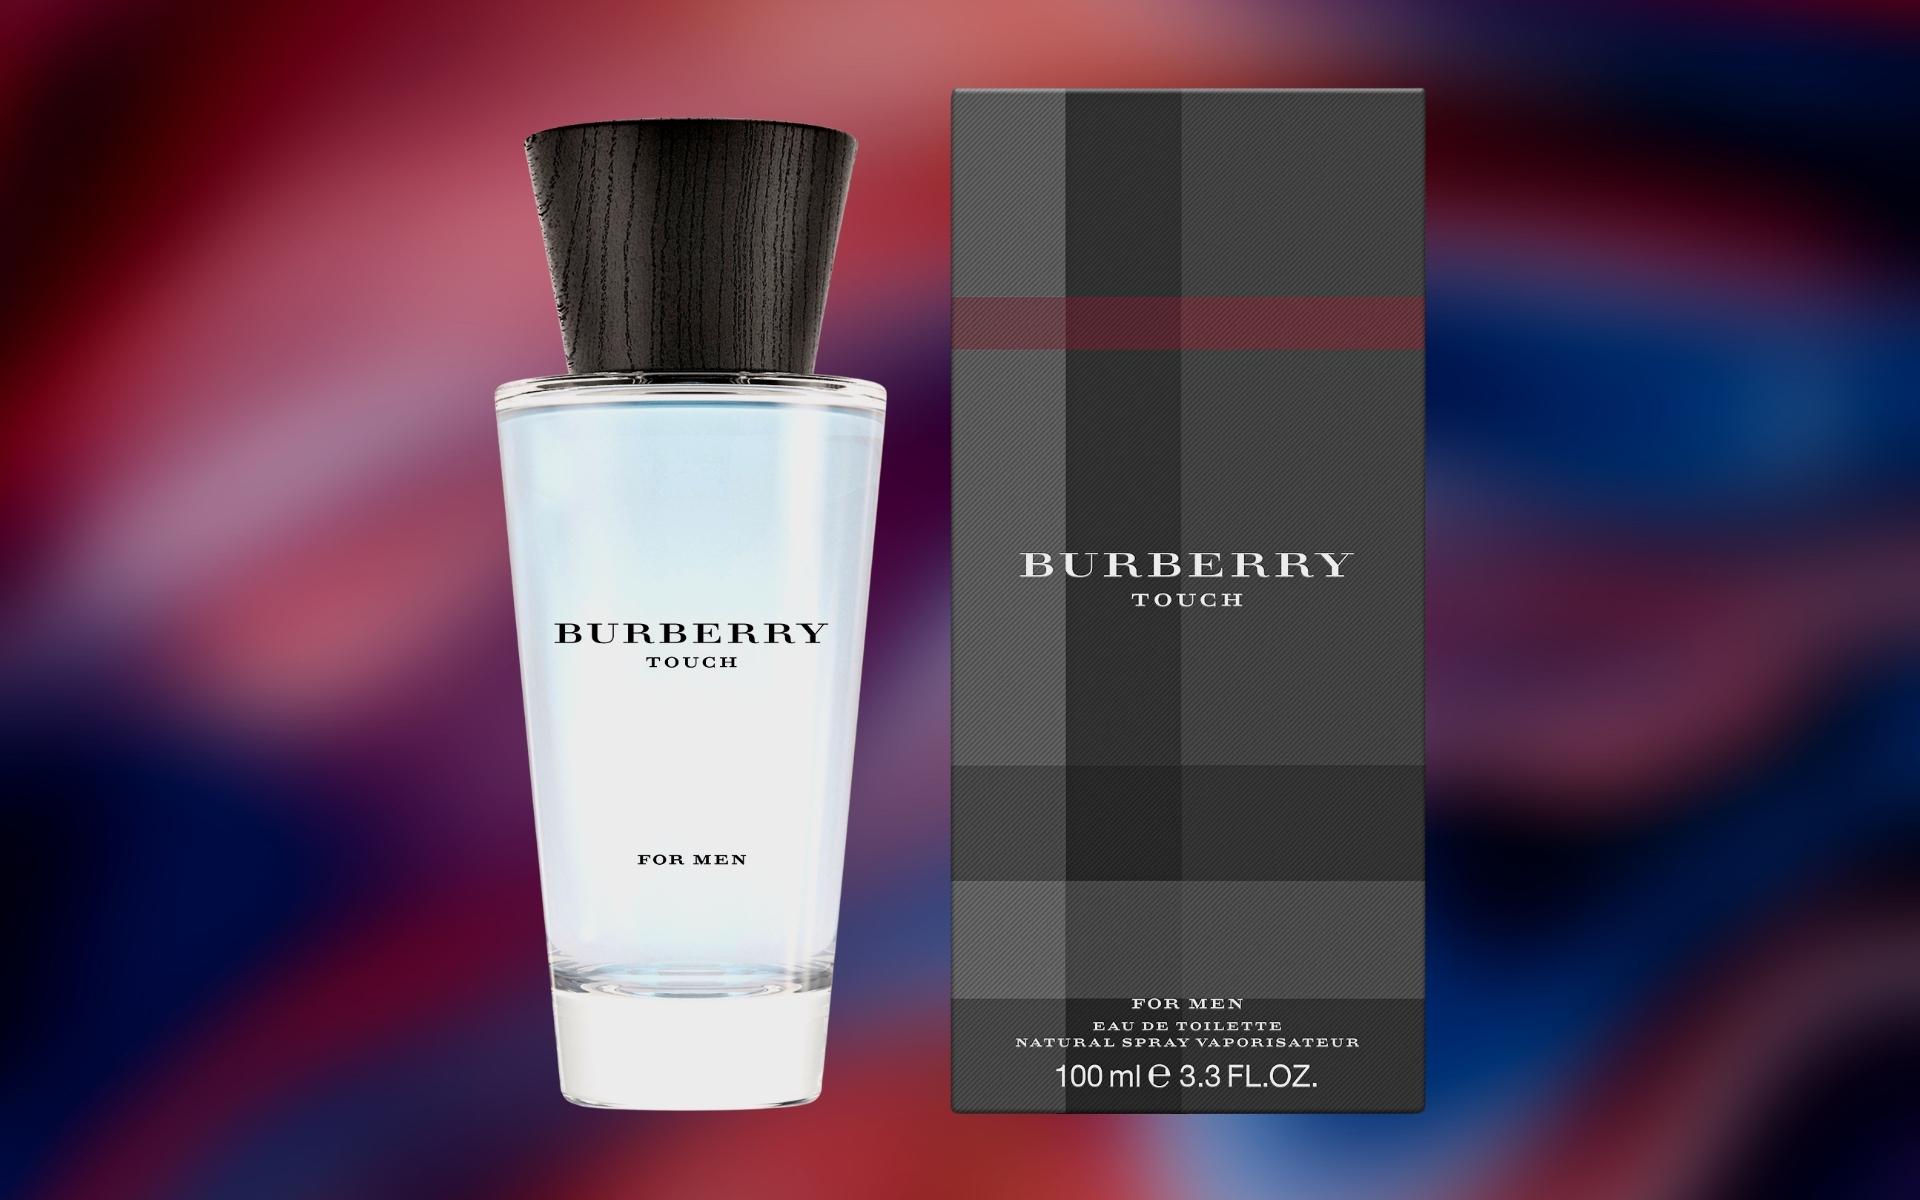 Burberry Touch for Men Review (EDT Cologne)